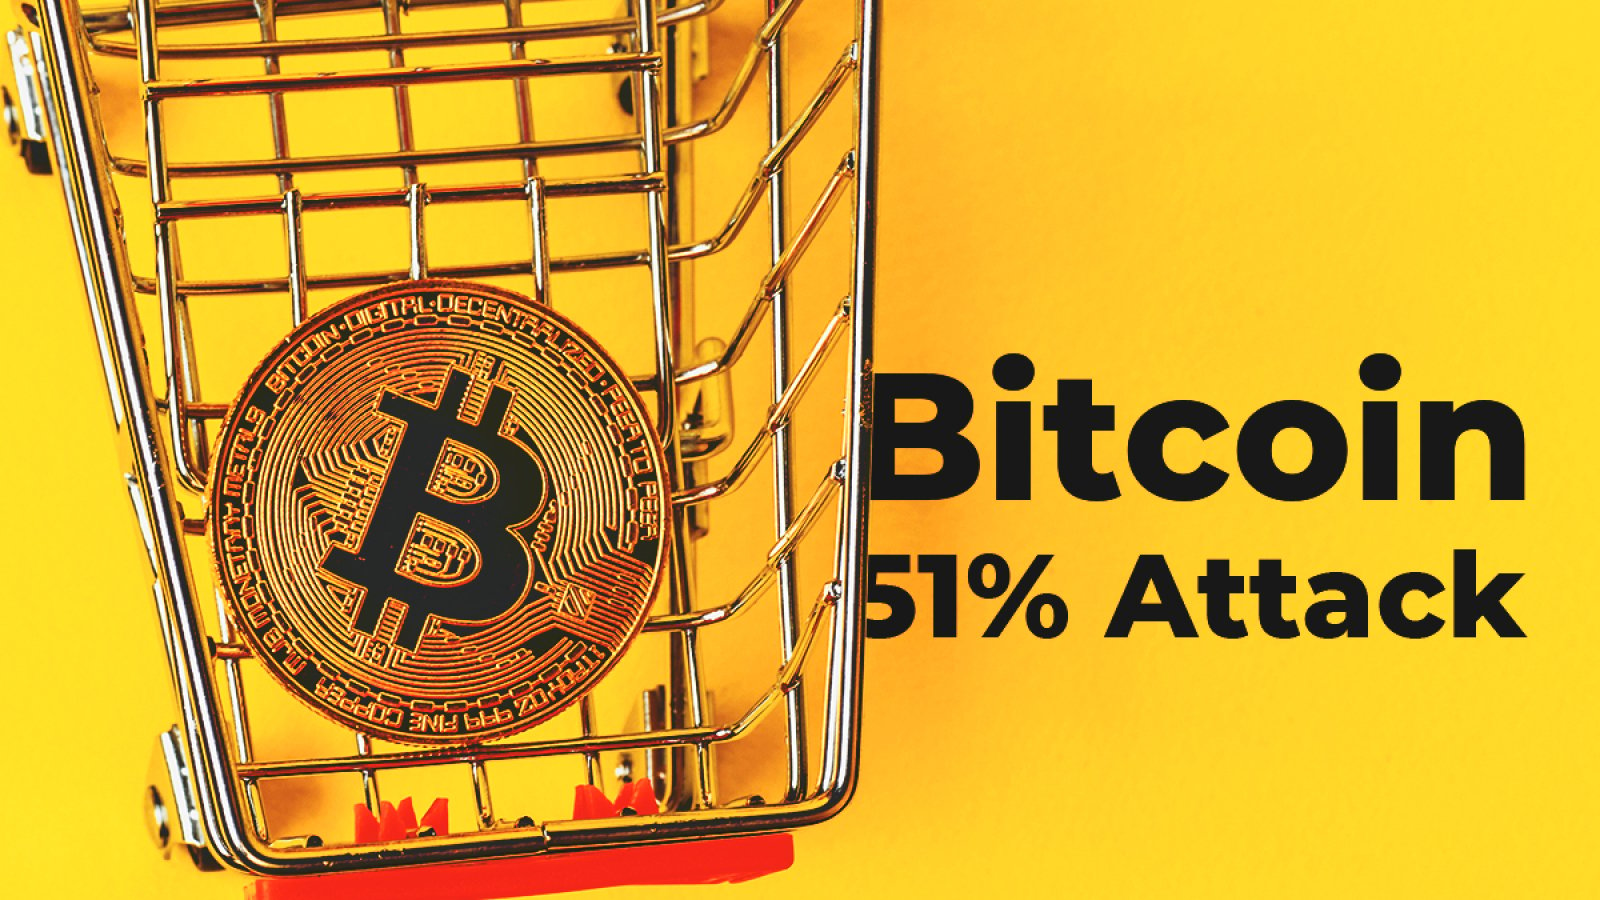 Bitcoin 51% Attack: How It Works, How Much Bitcoin 51 Attack Costs